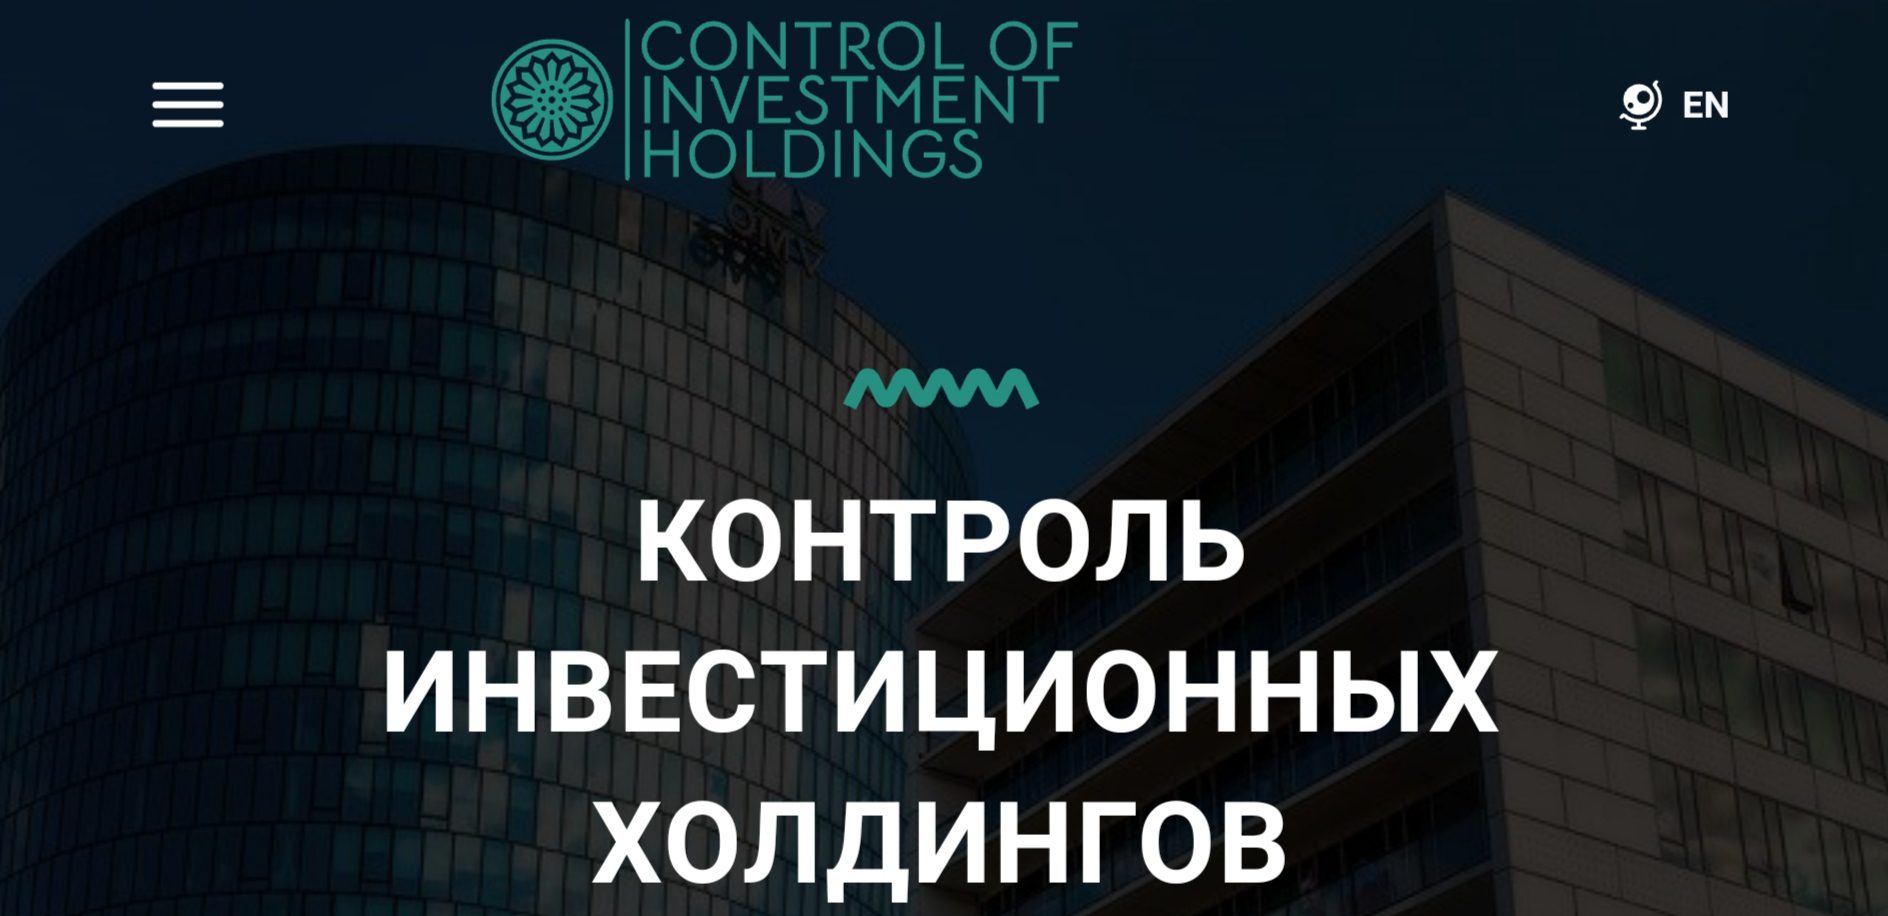 Сайт Control of Investment Holdings